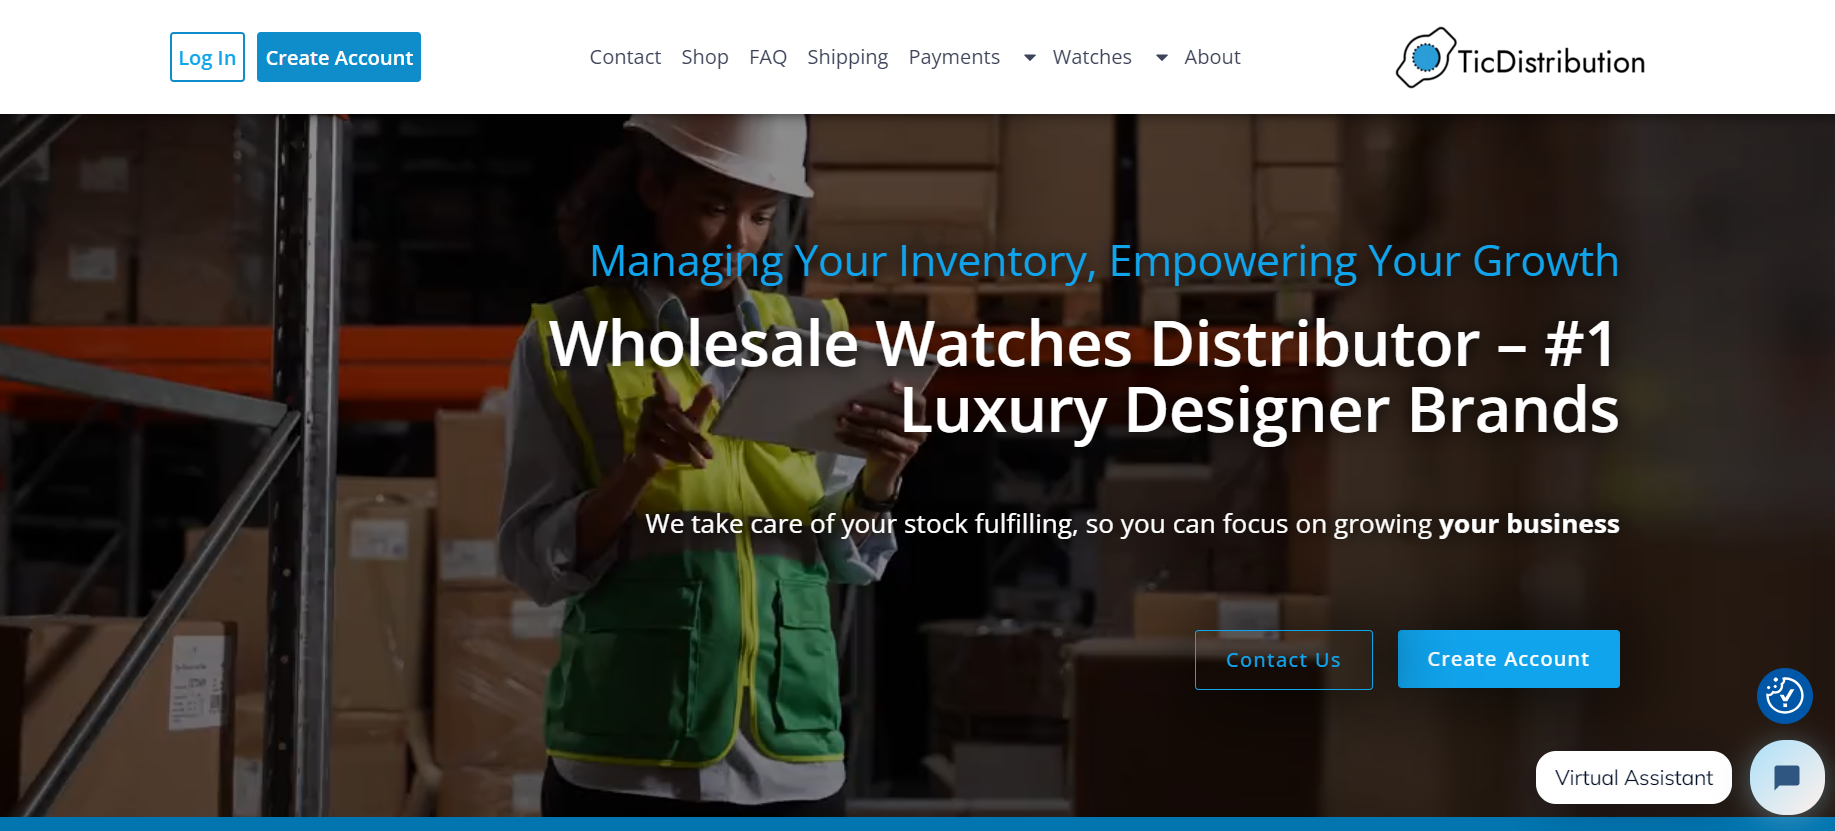 TicDistribution offers exceptional opportunities for dropshipping businesses looking to supply luxury watches. 